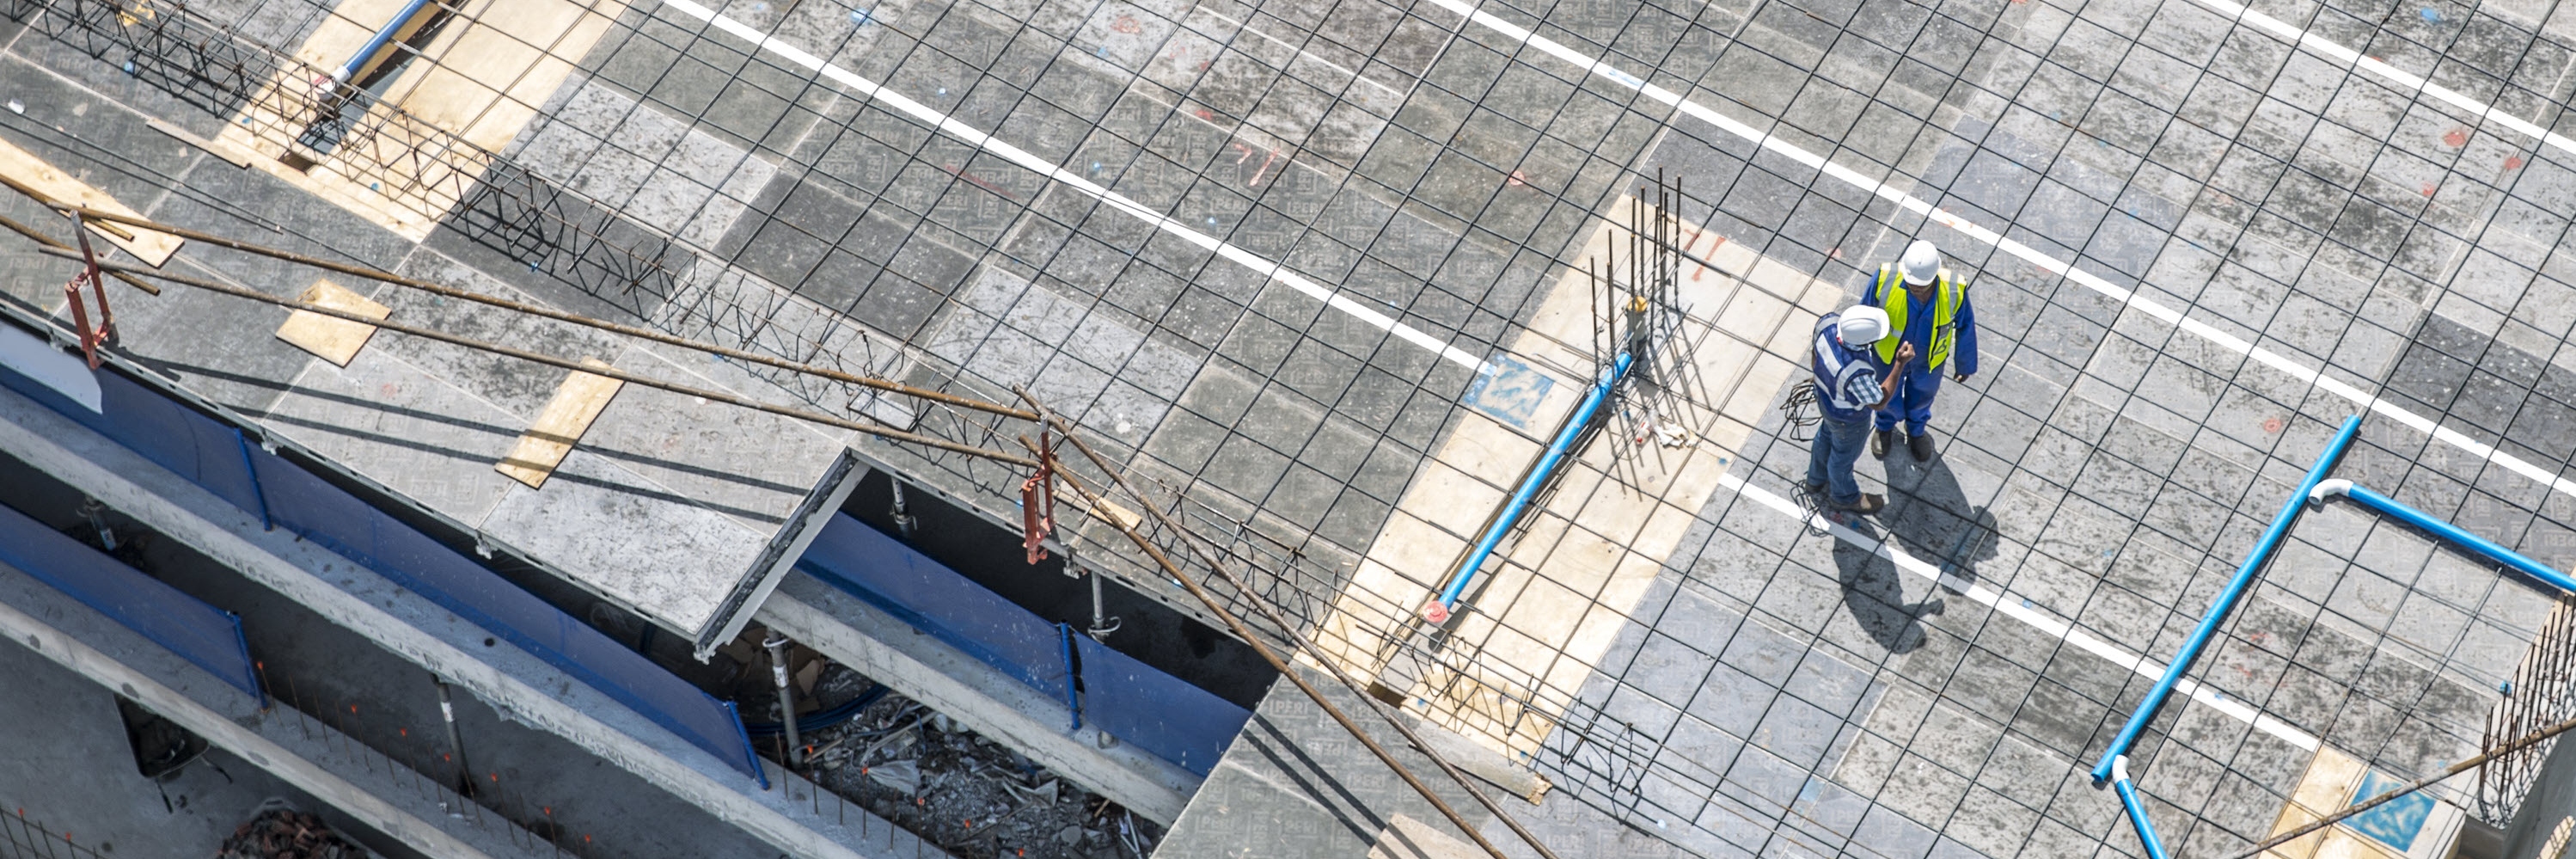 HSB Construction Insurance: Our comprehensive range of insurance policies can cover all aspects of commercial/residential construction projects.